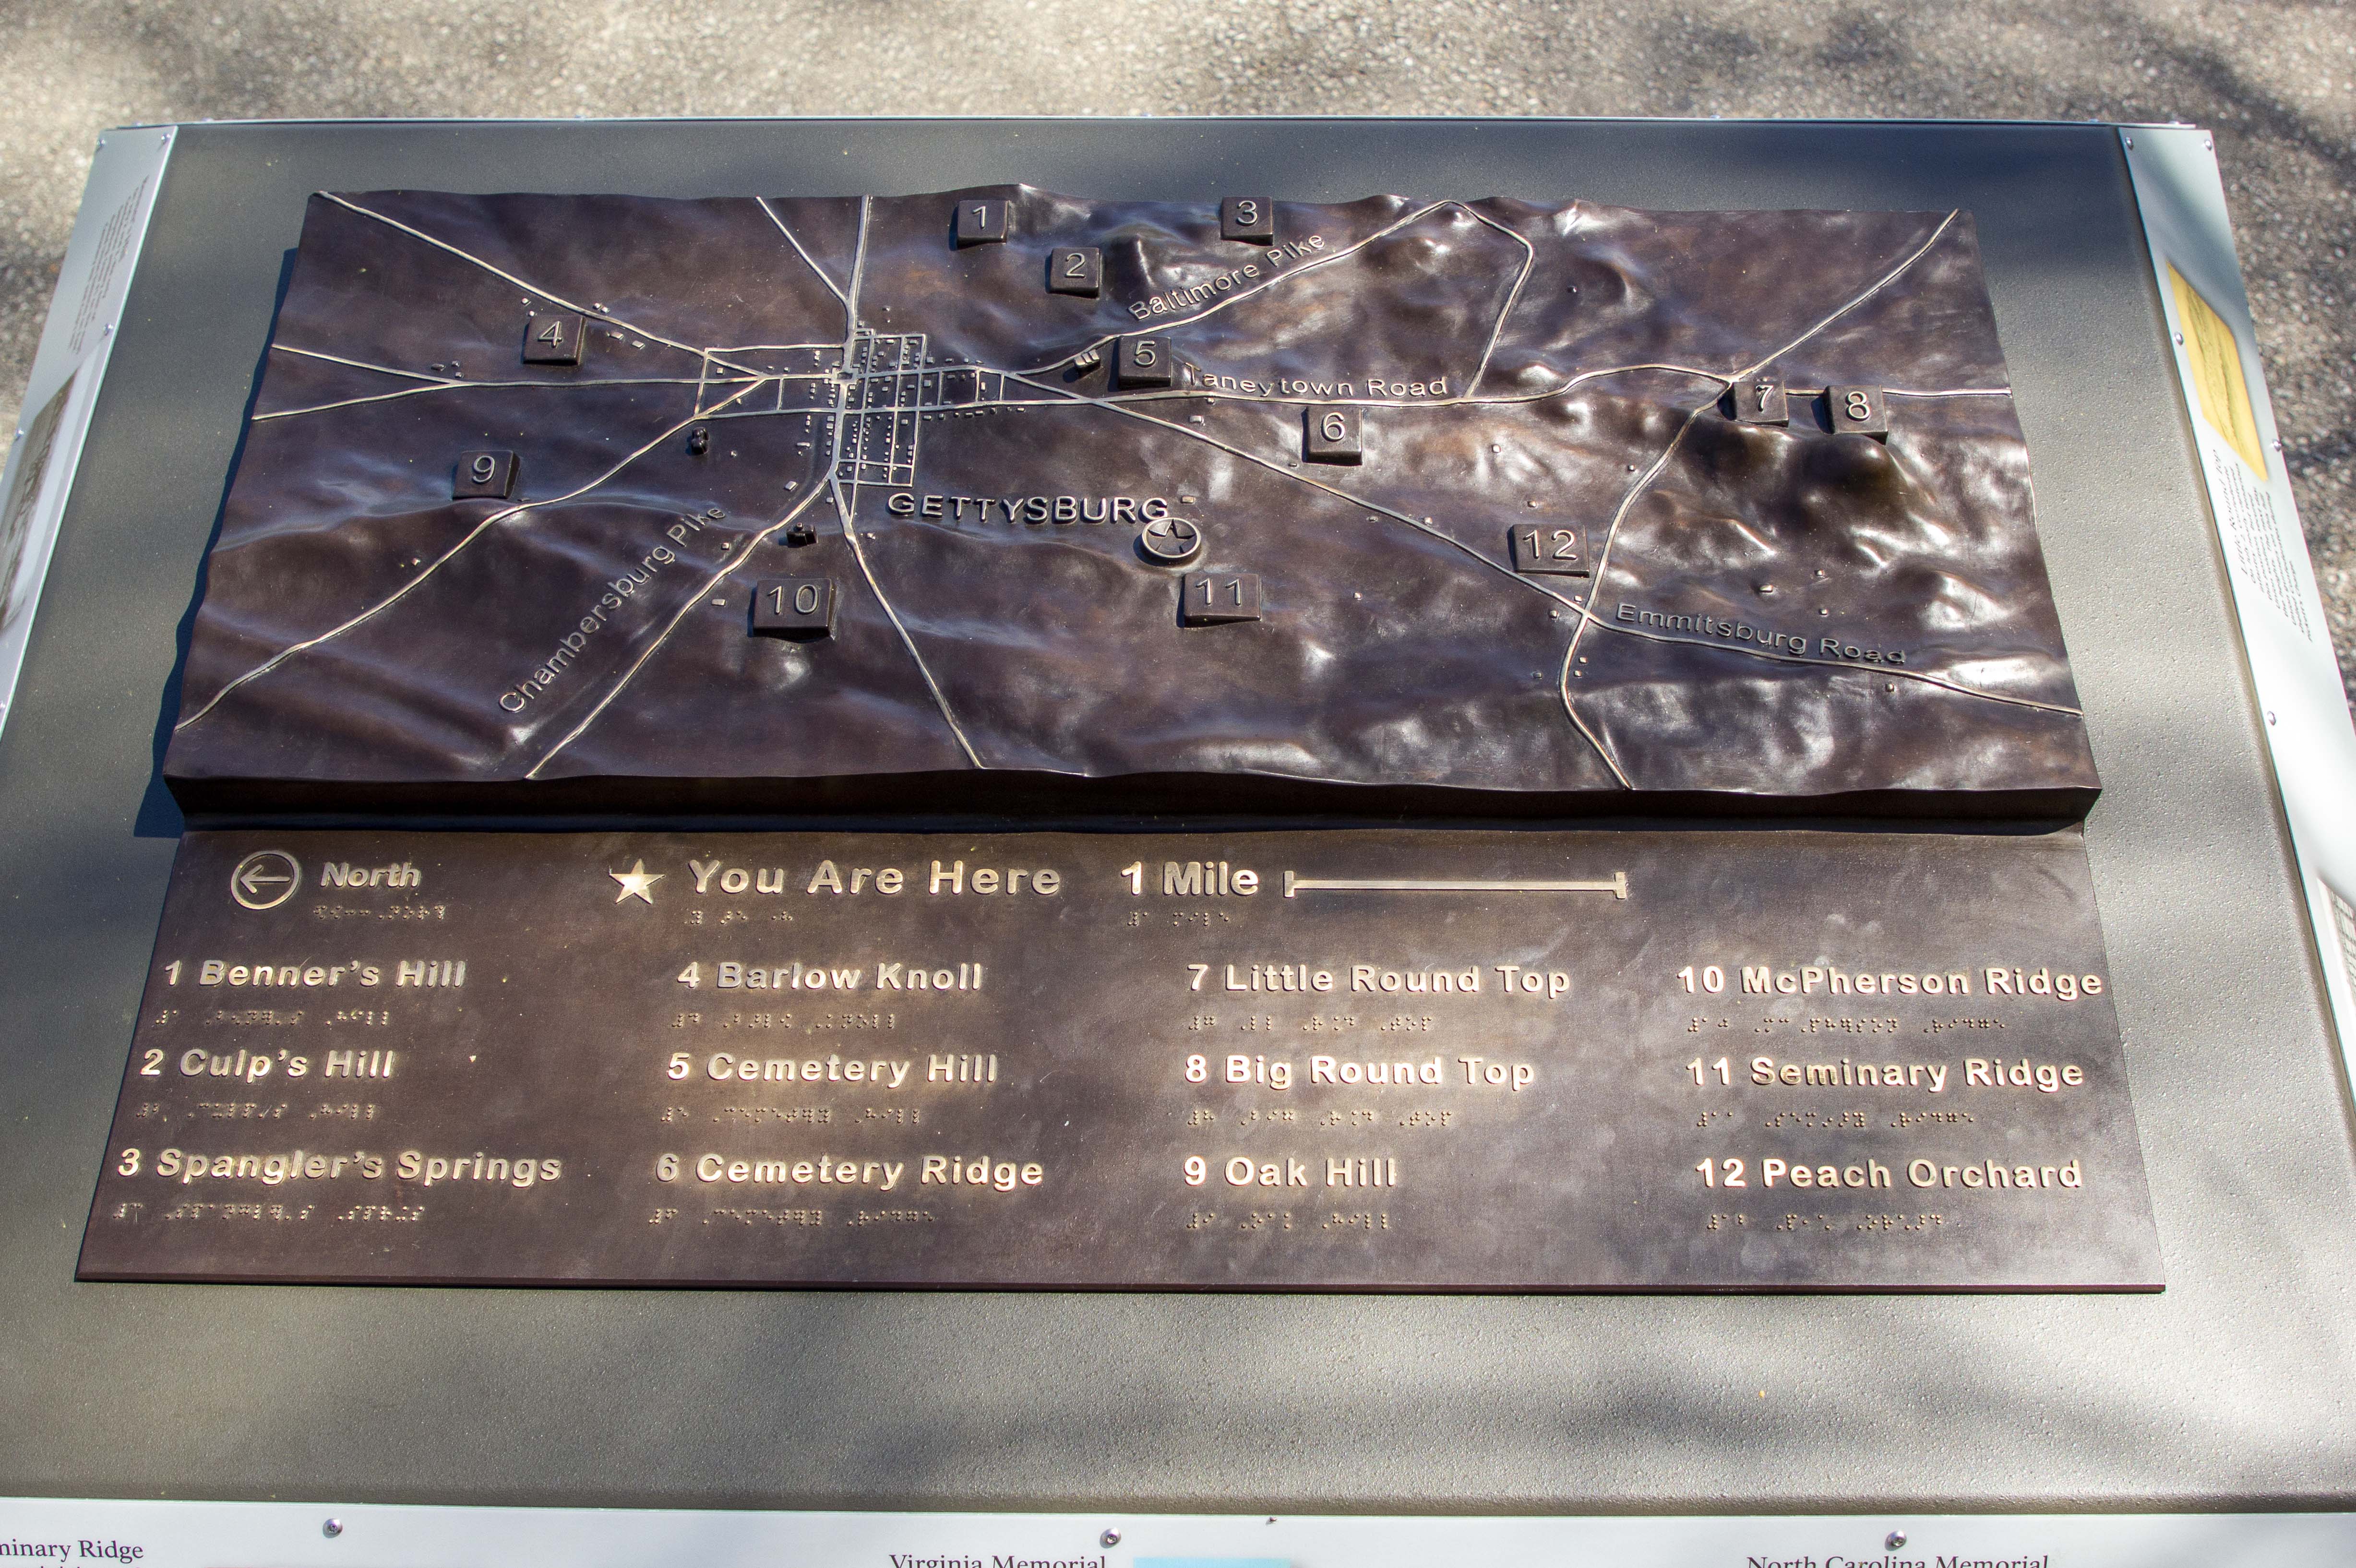 A bronze relief tactile map of the Gettysburg battlefield includes braille and raised lettering.